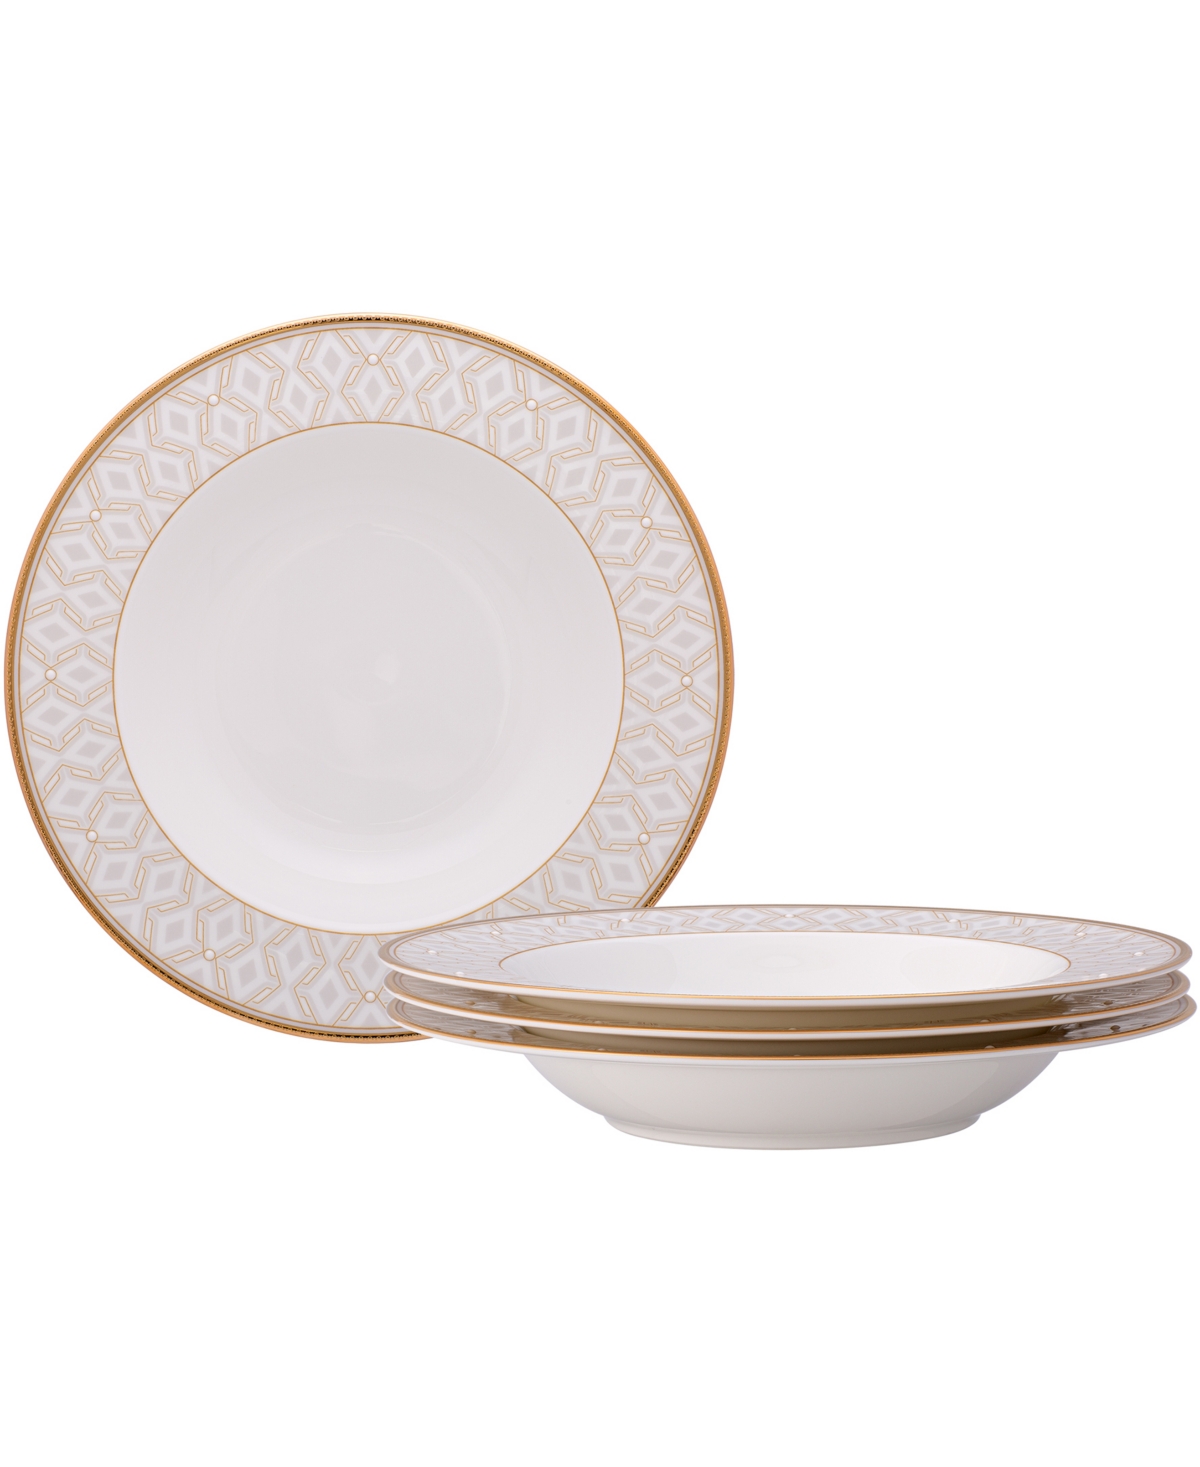 Noritake Noble Pearl Set Of 4 Soup Bowls, 8 1/2" 12 Oz. In White And Gold